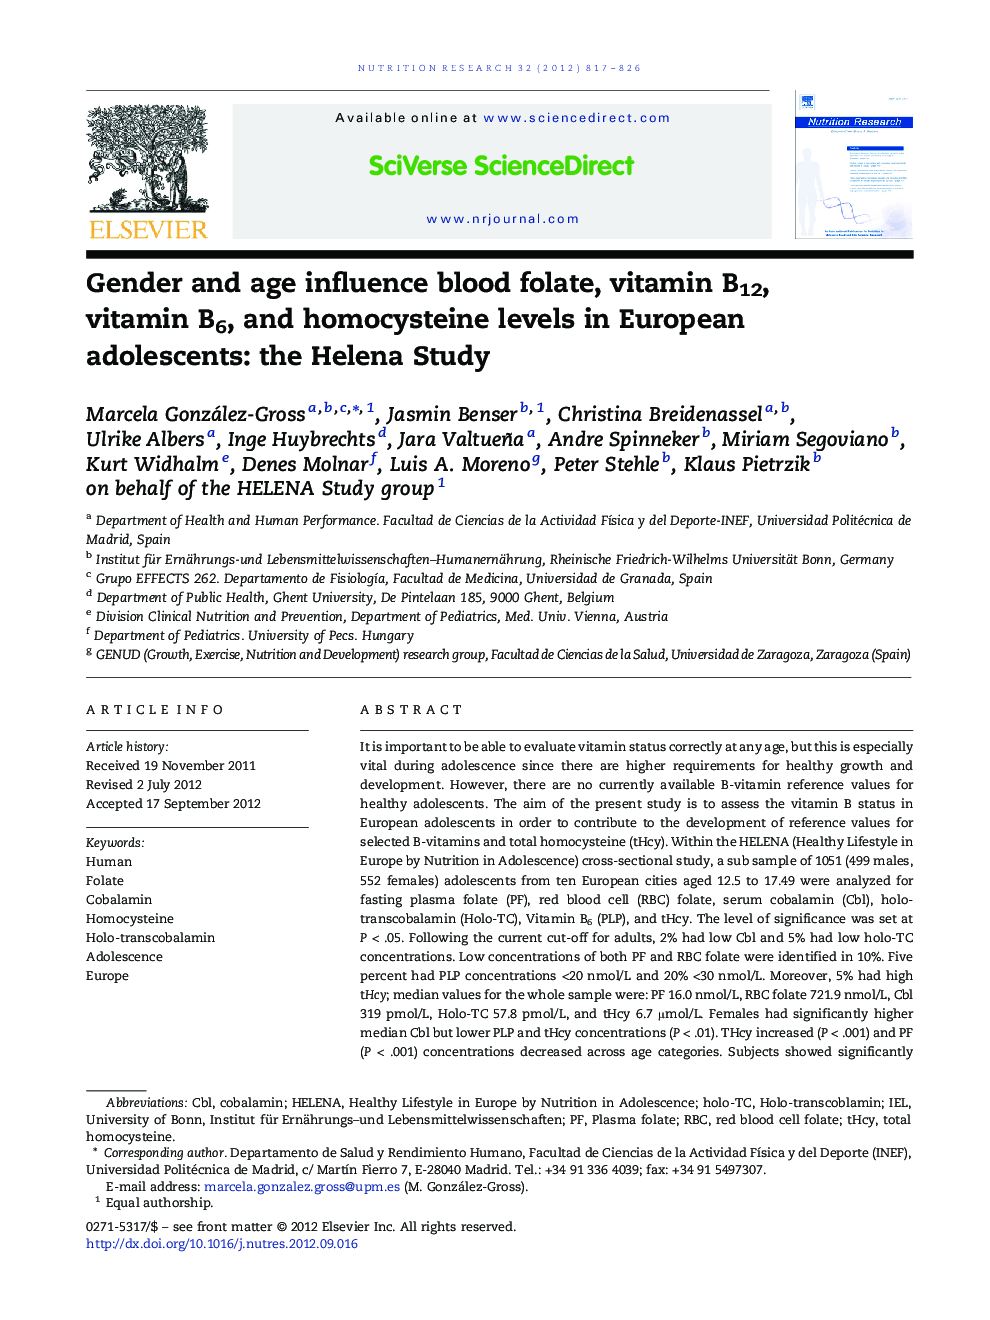 Gender and age influence blood folate, vitamin B12, vitamin B6, and homocysteine levels in European adolescents: the Helena Study